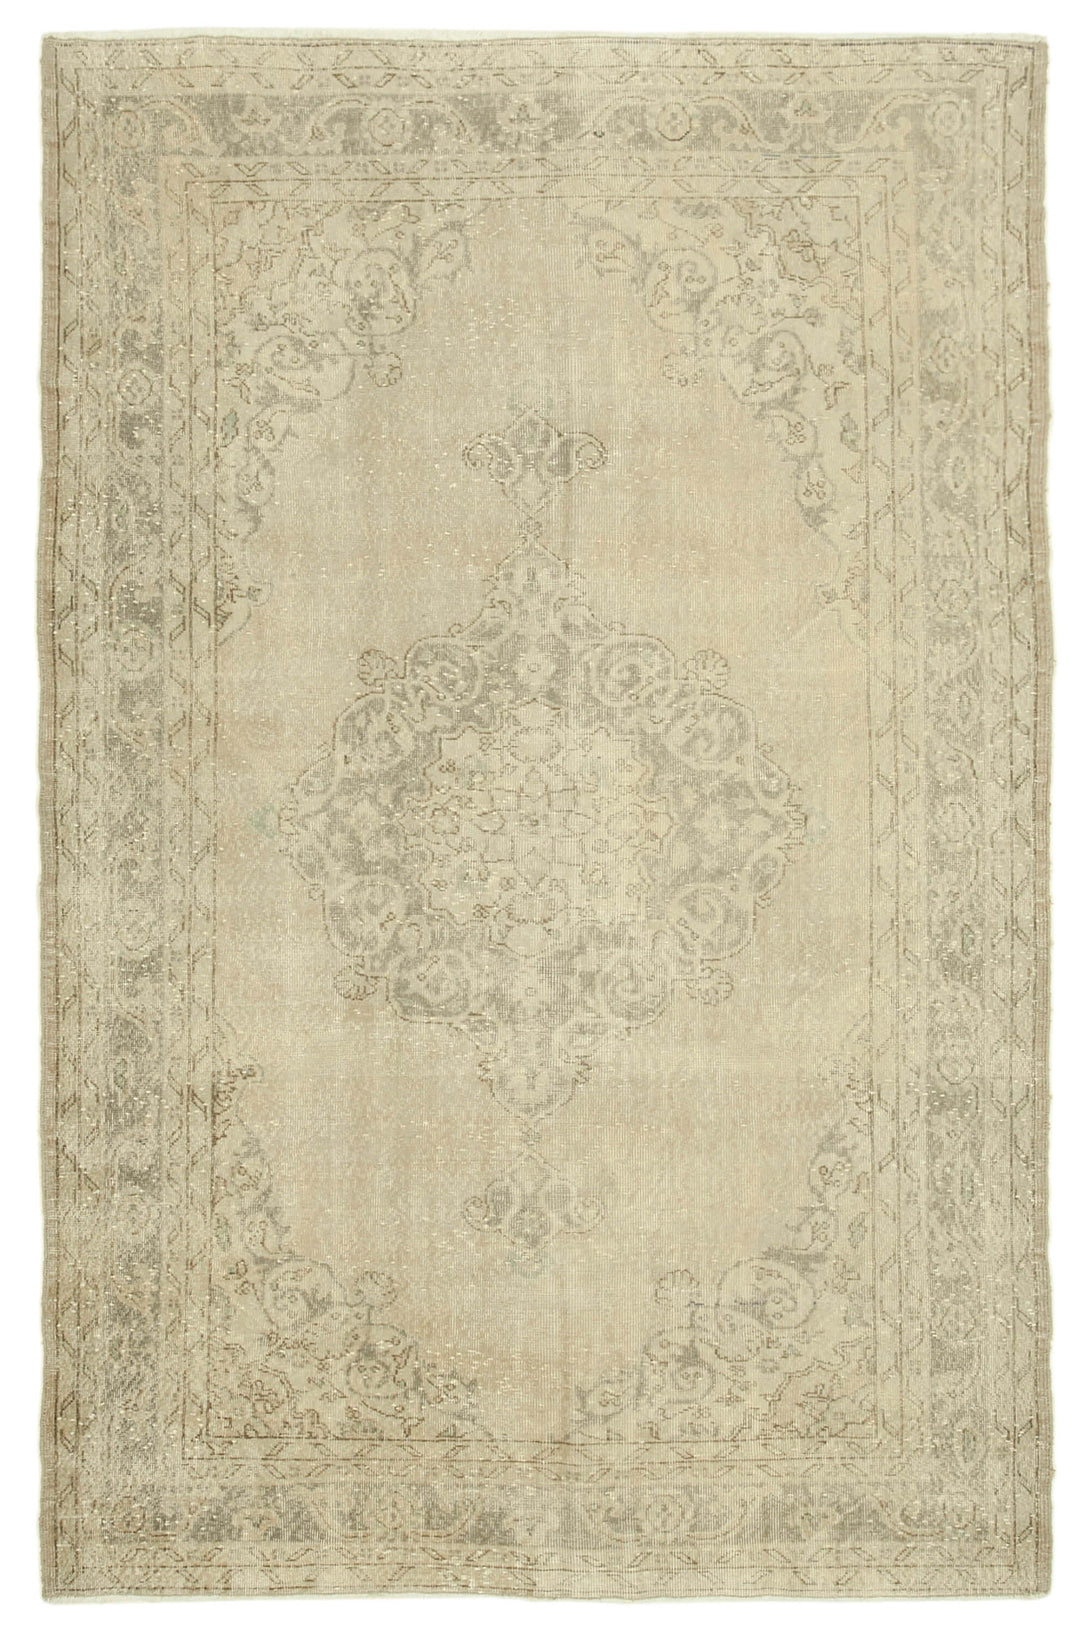 Handmade White Wash Area Rug > Design# OL-AC-38844 > Size: 6'-9" x 10'-6", Carpet Culture Rugs, Handmade Rugs, NYC Rugs, New Rugs, Shop Rugs, Rug Store, Outlet Rugs, SoHo Rugs, Rugs in USA